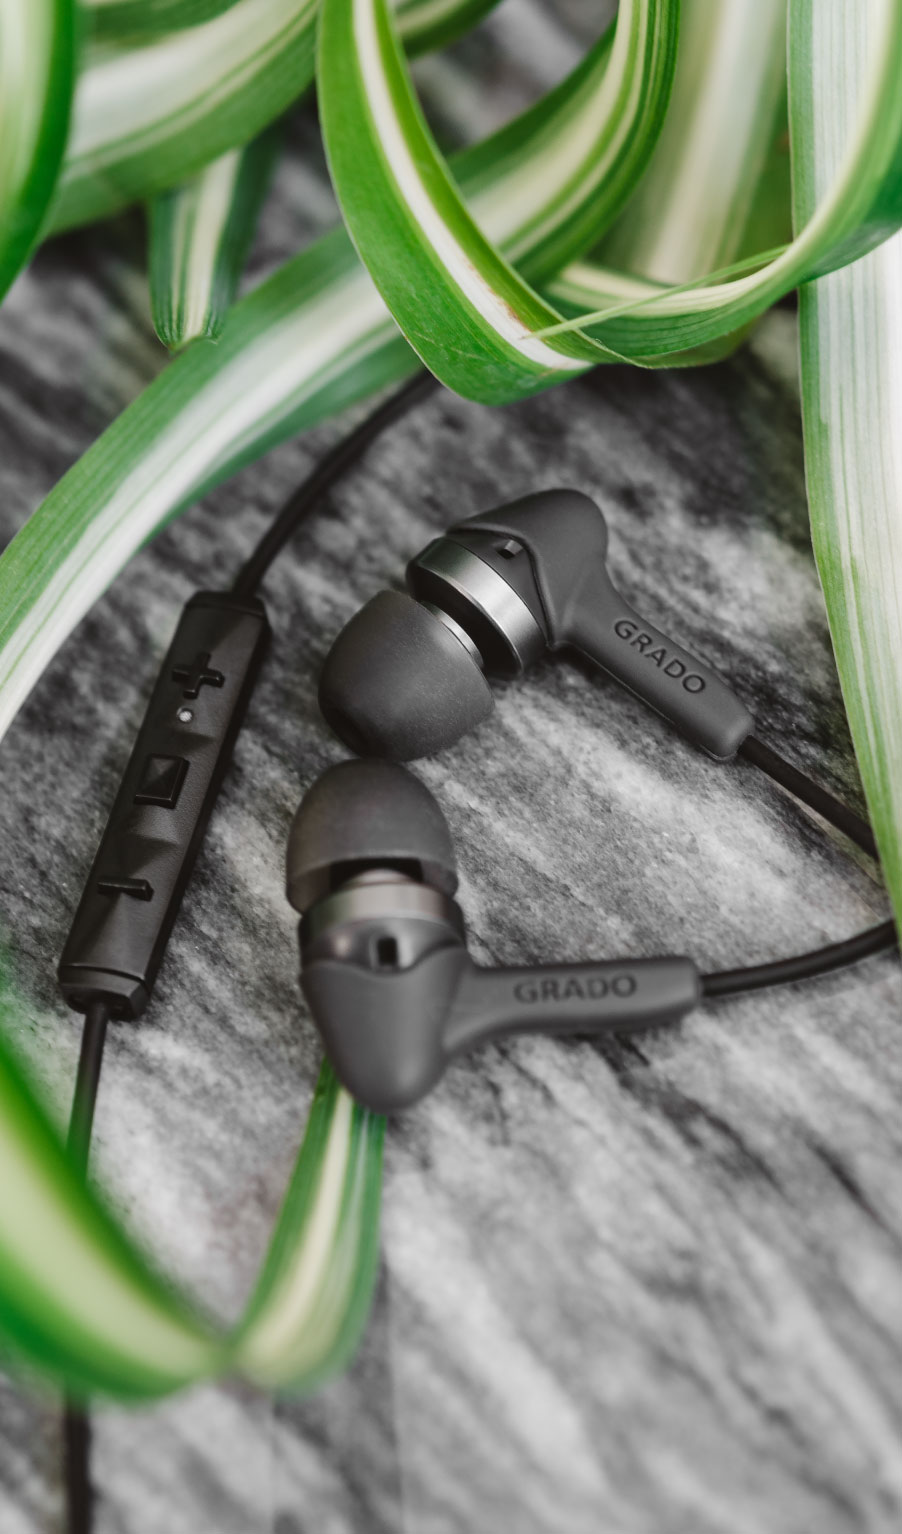 Photo of grado ige3 headphones on a grey table with green plant leaves in the foreground